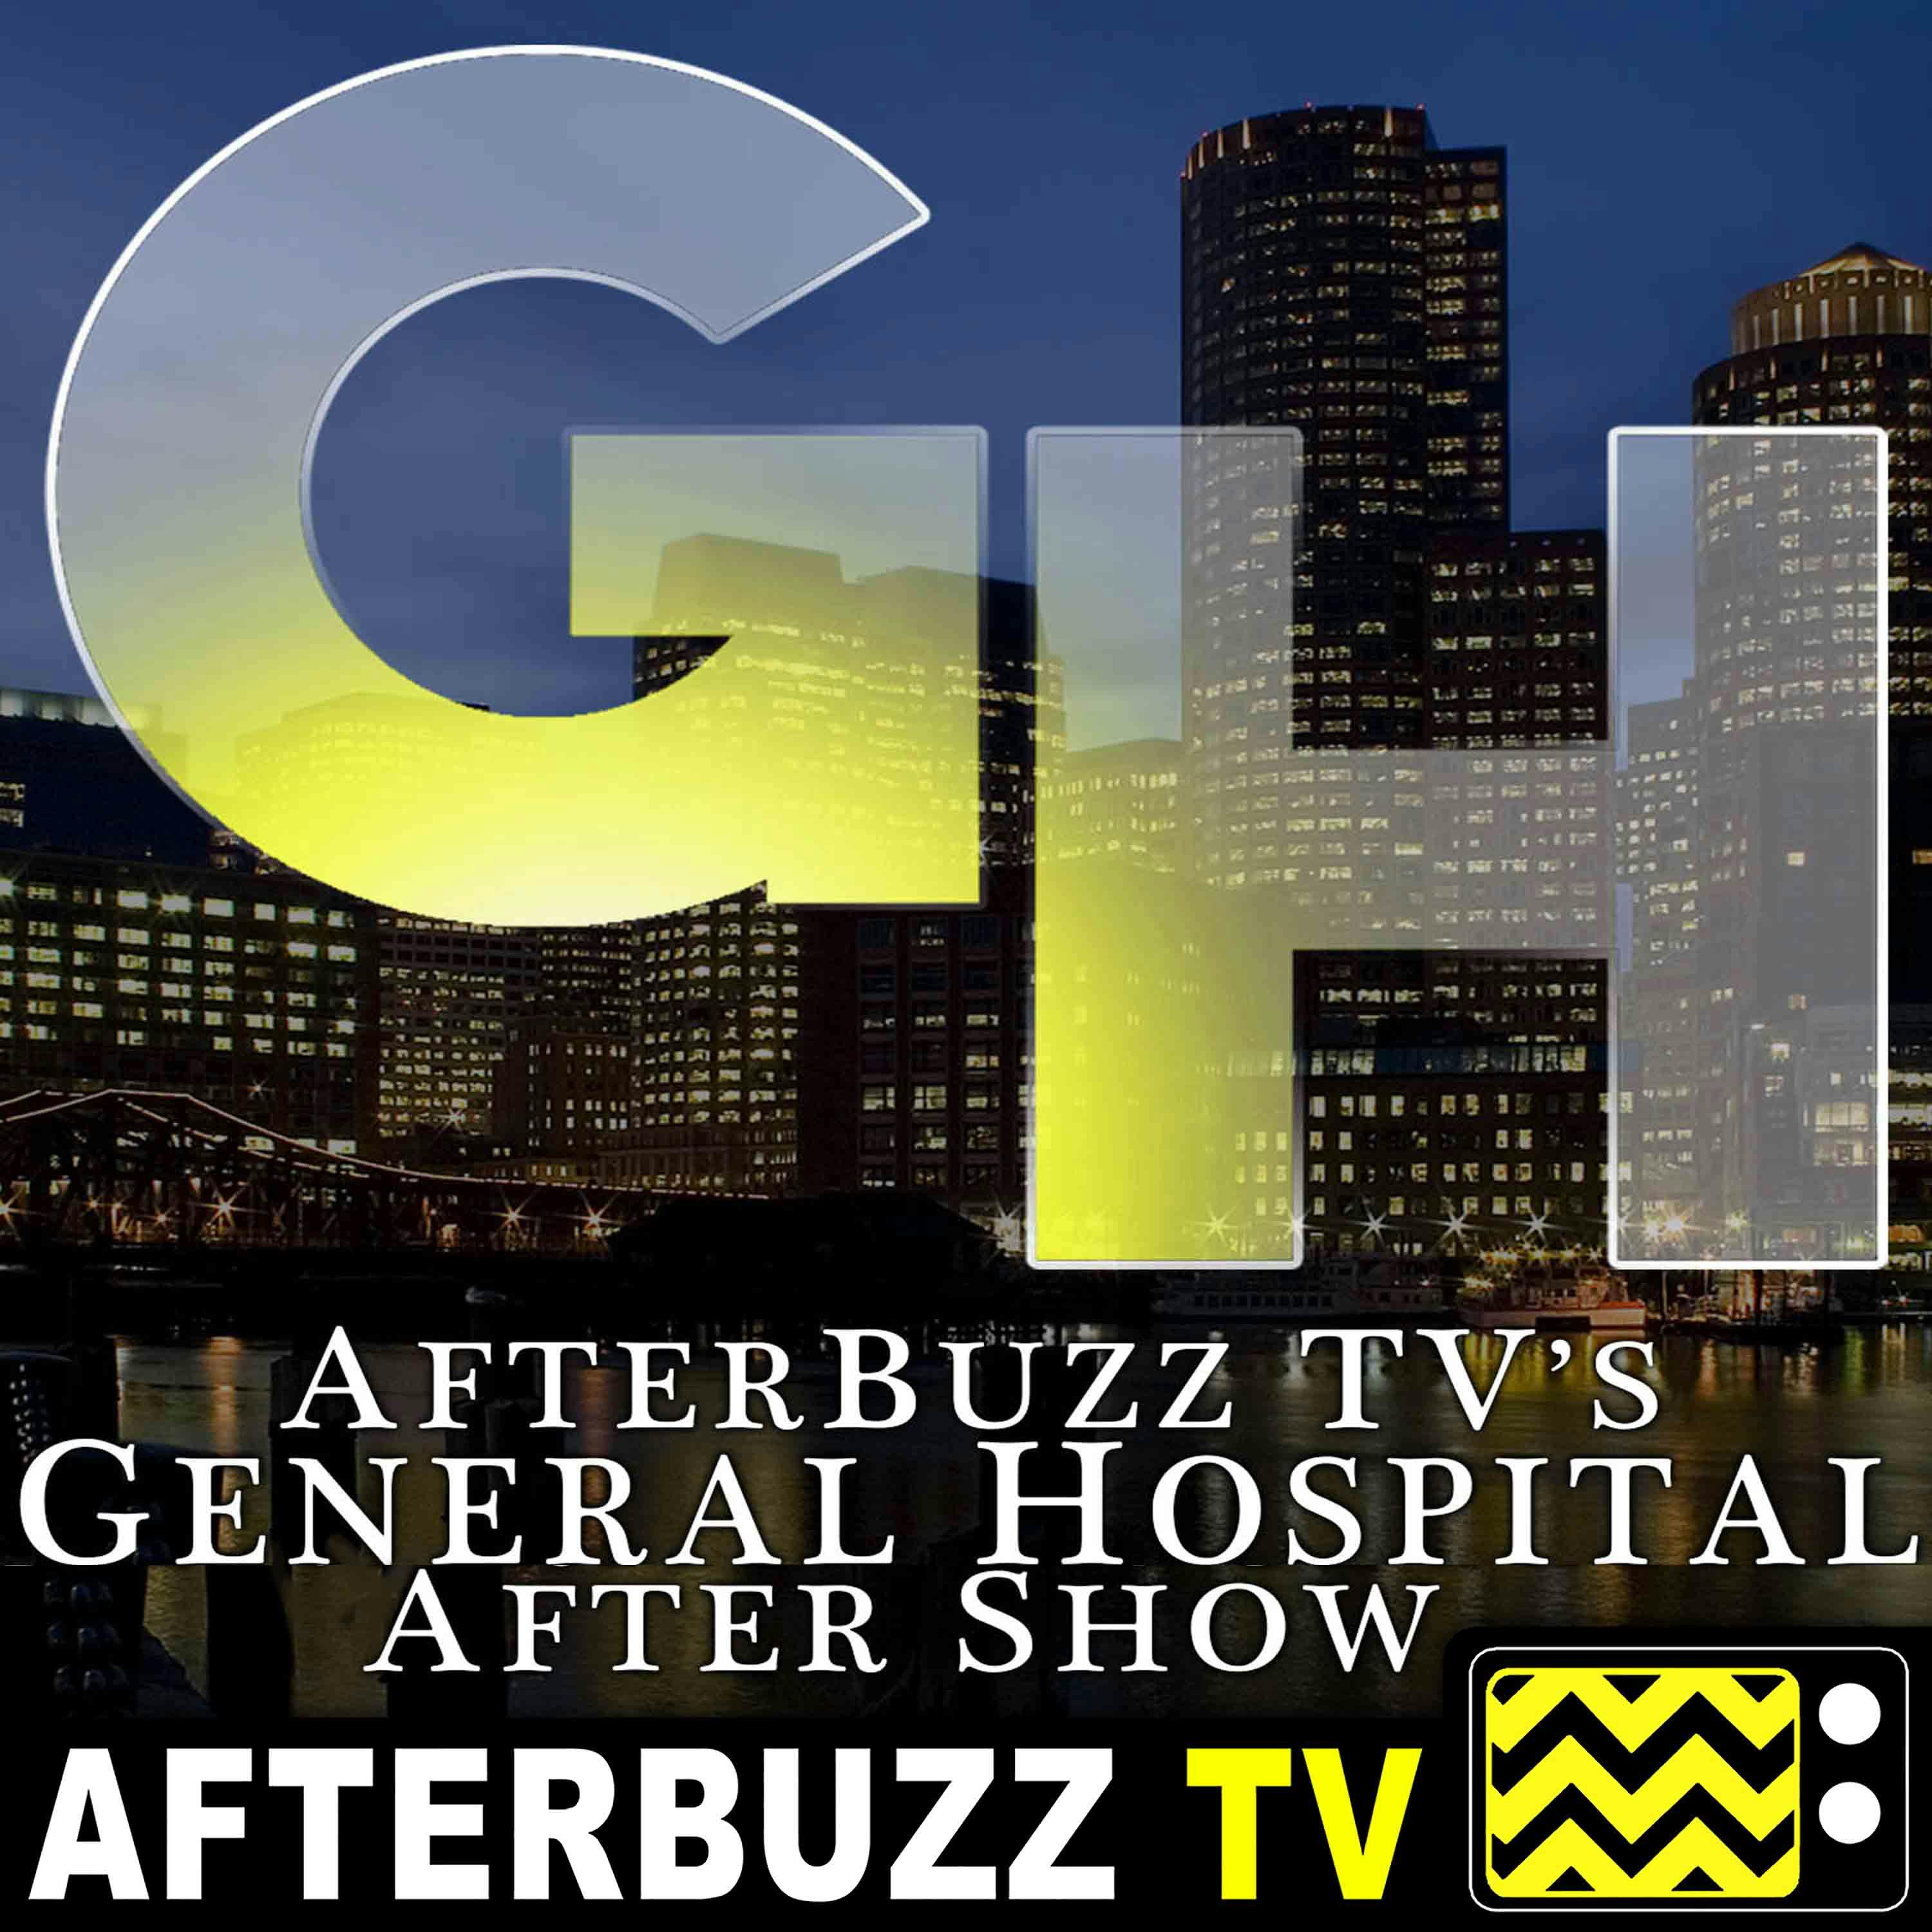 Review Of General Hospital for October 22nd - October 26th, 2018